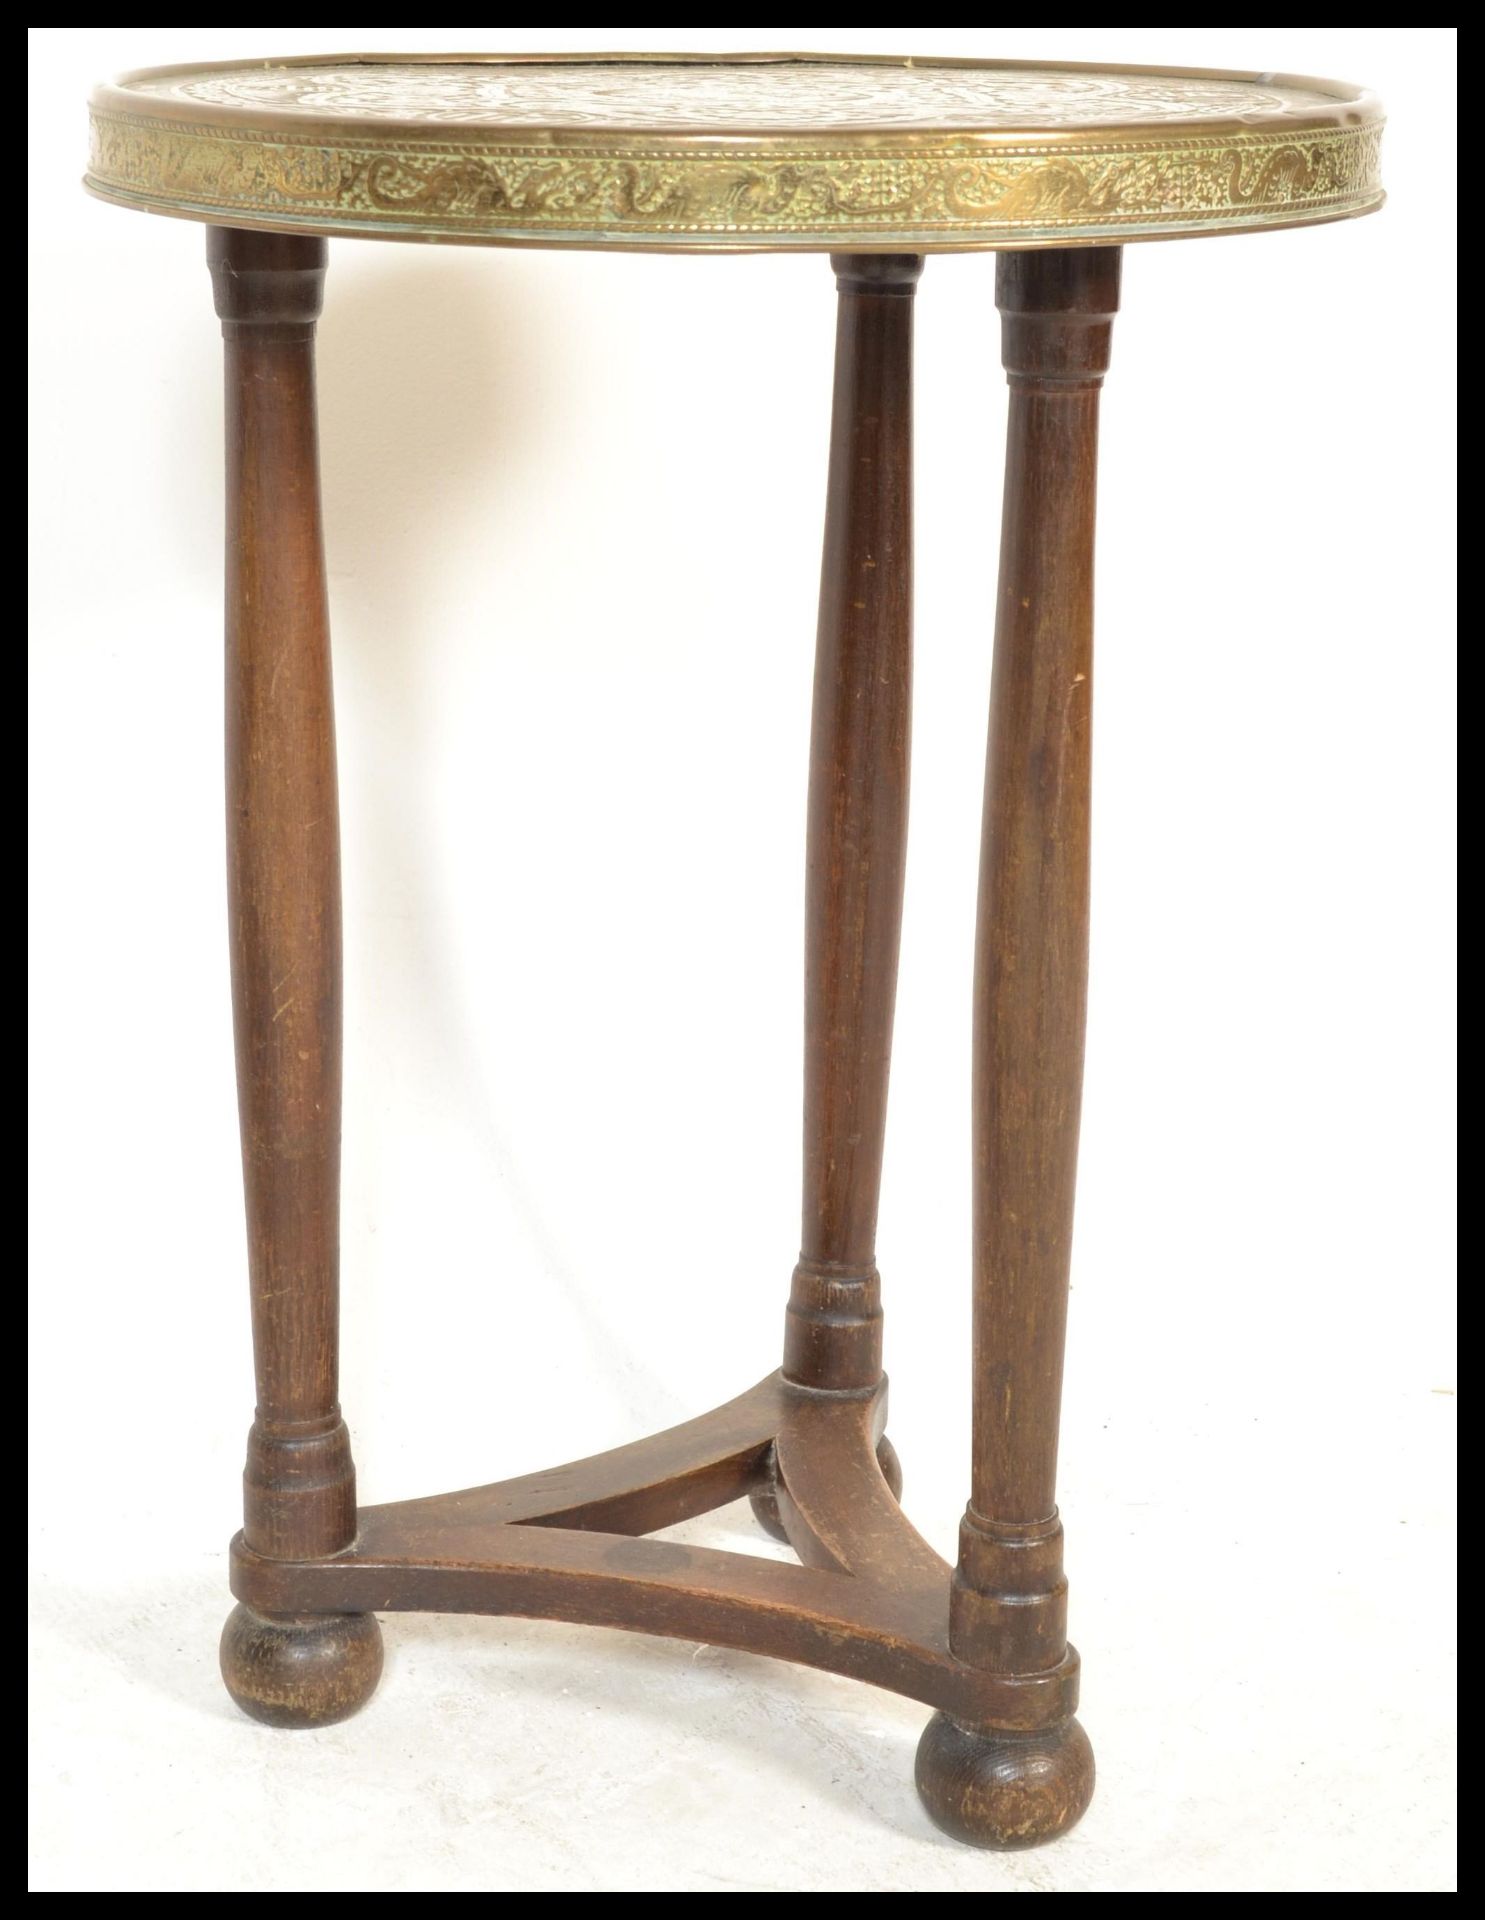 An early 20th Century Edwardian brass topped occasional side table, the brass top decorated with a